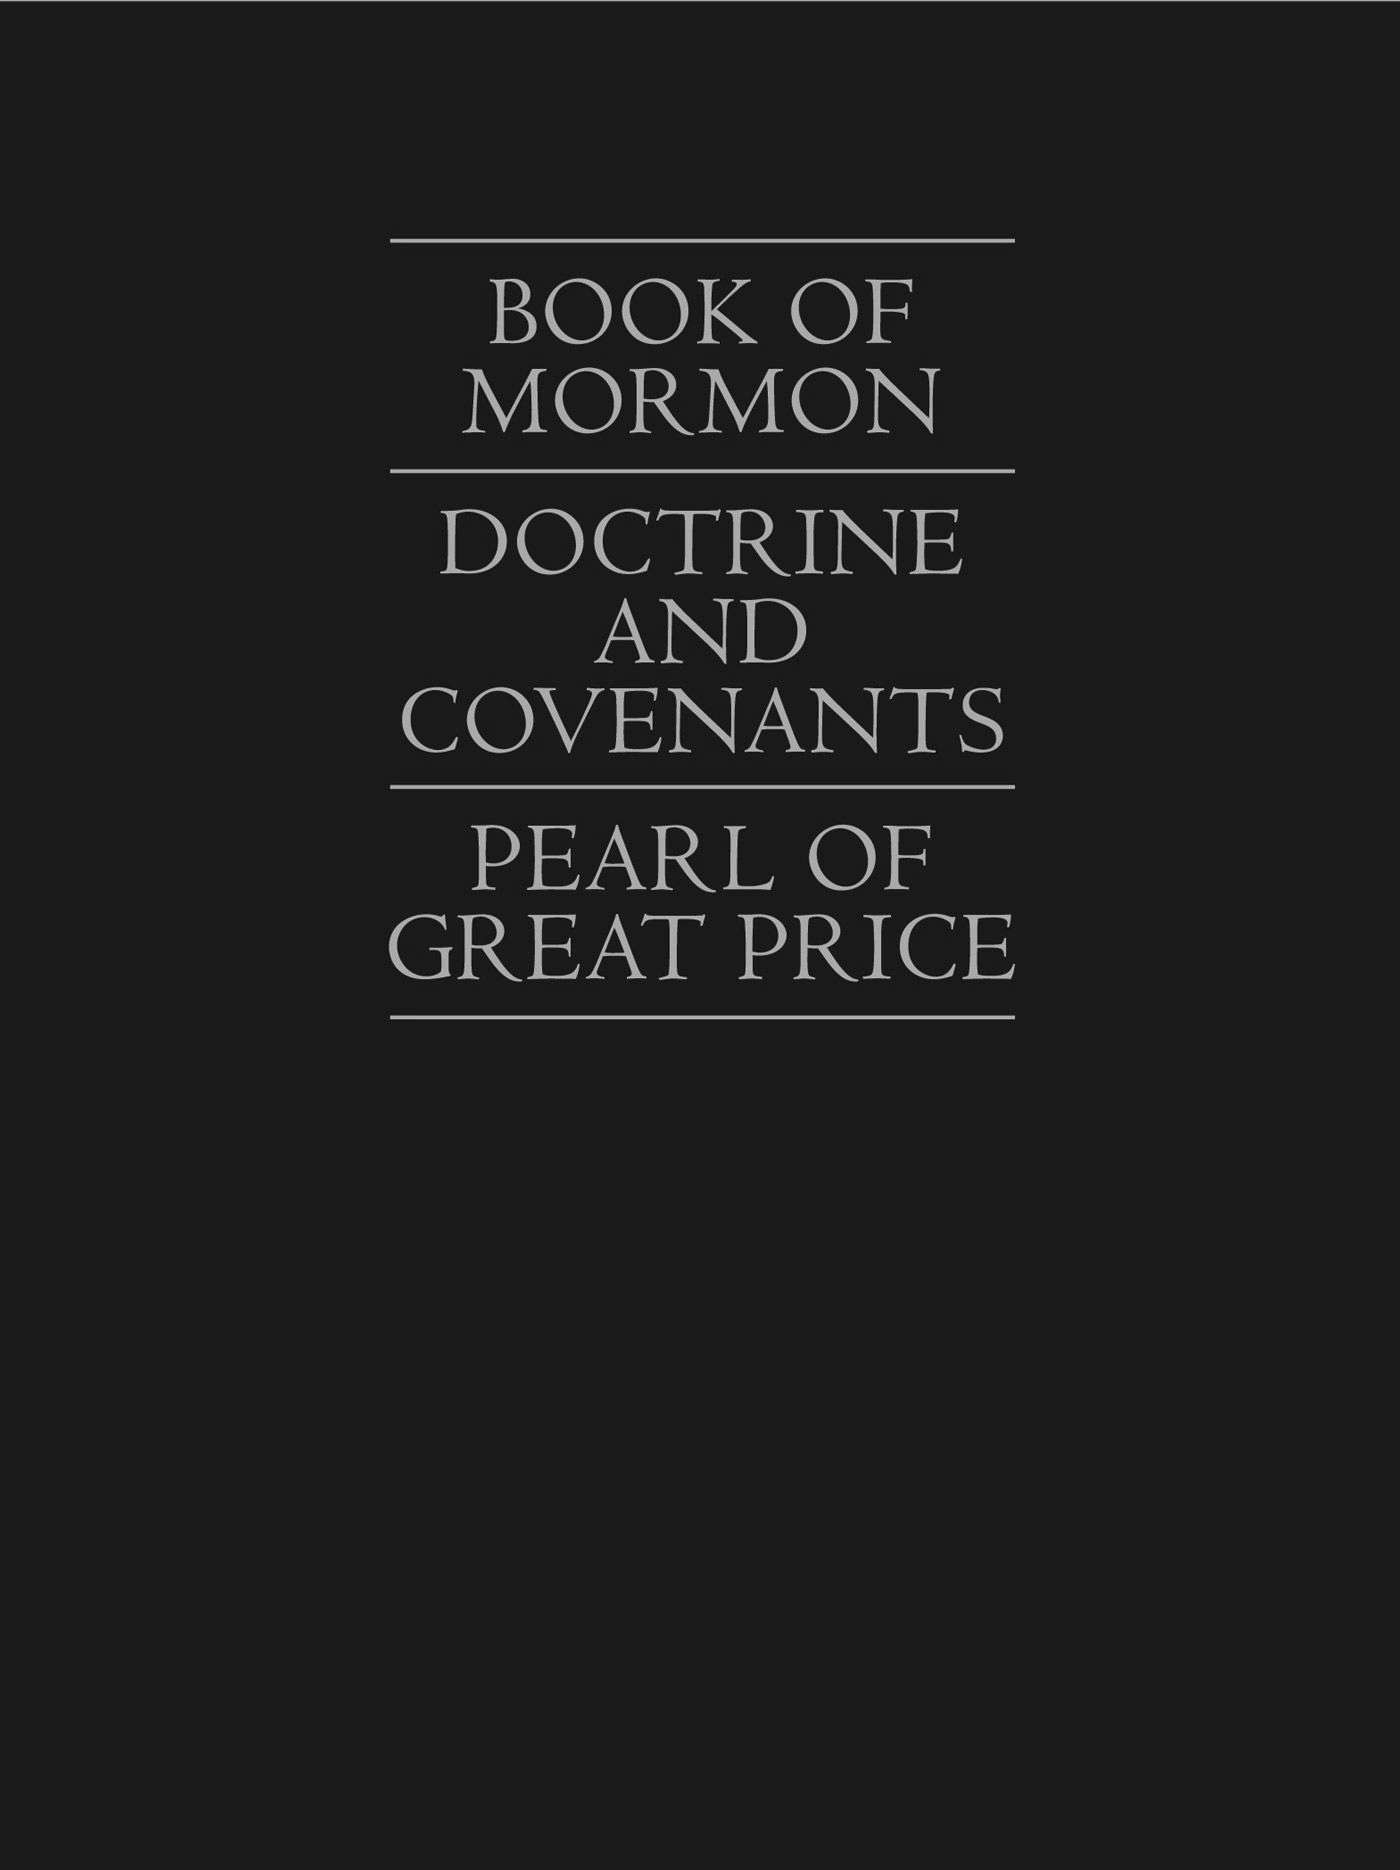 The Book of Mormon, the Doctrine and Covenants, the Pearl of Great Price